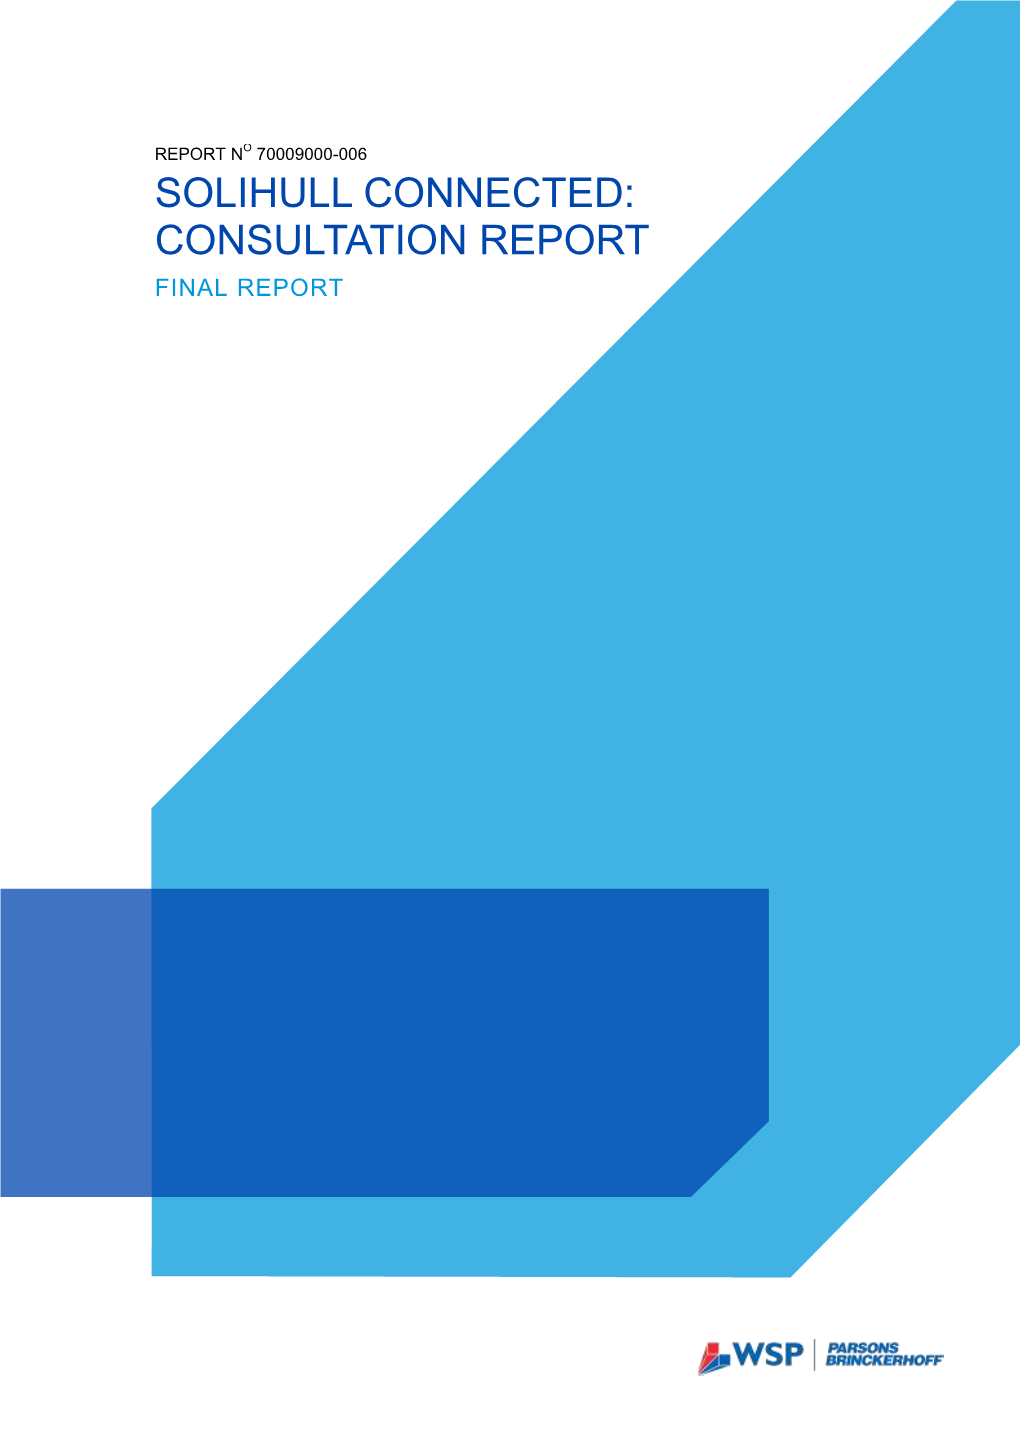 Solihull Connected: Consultation Report Final Report